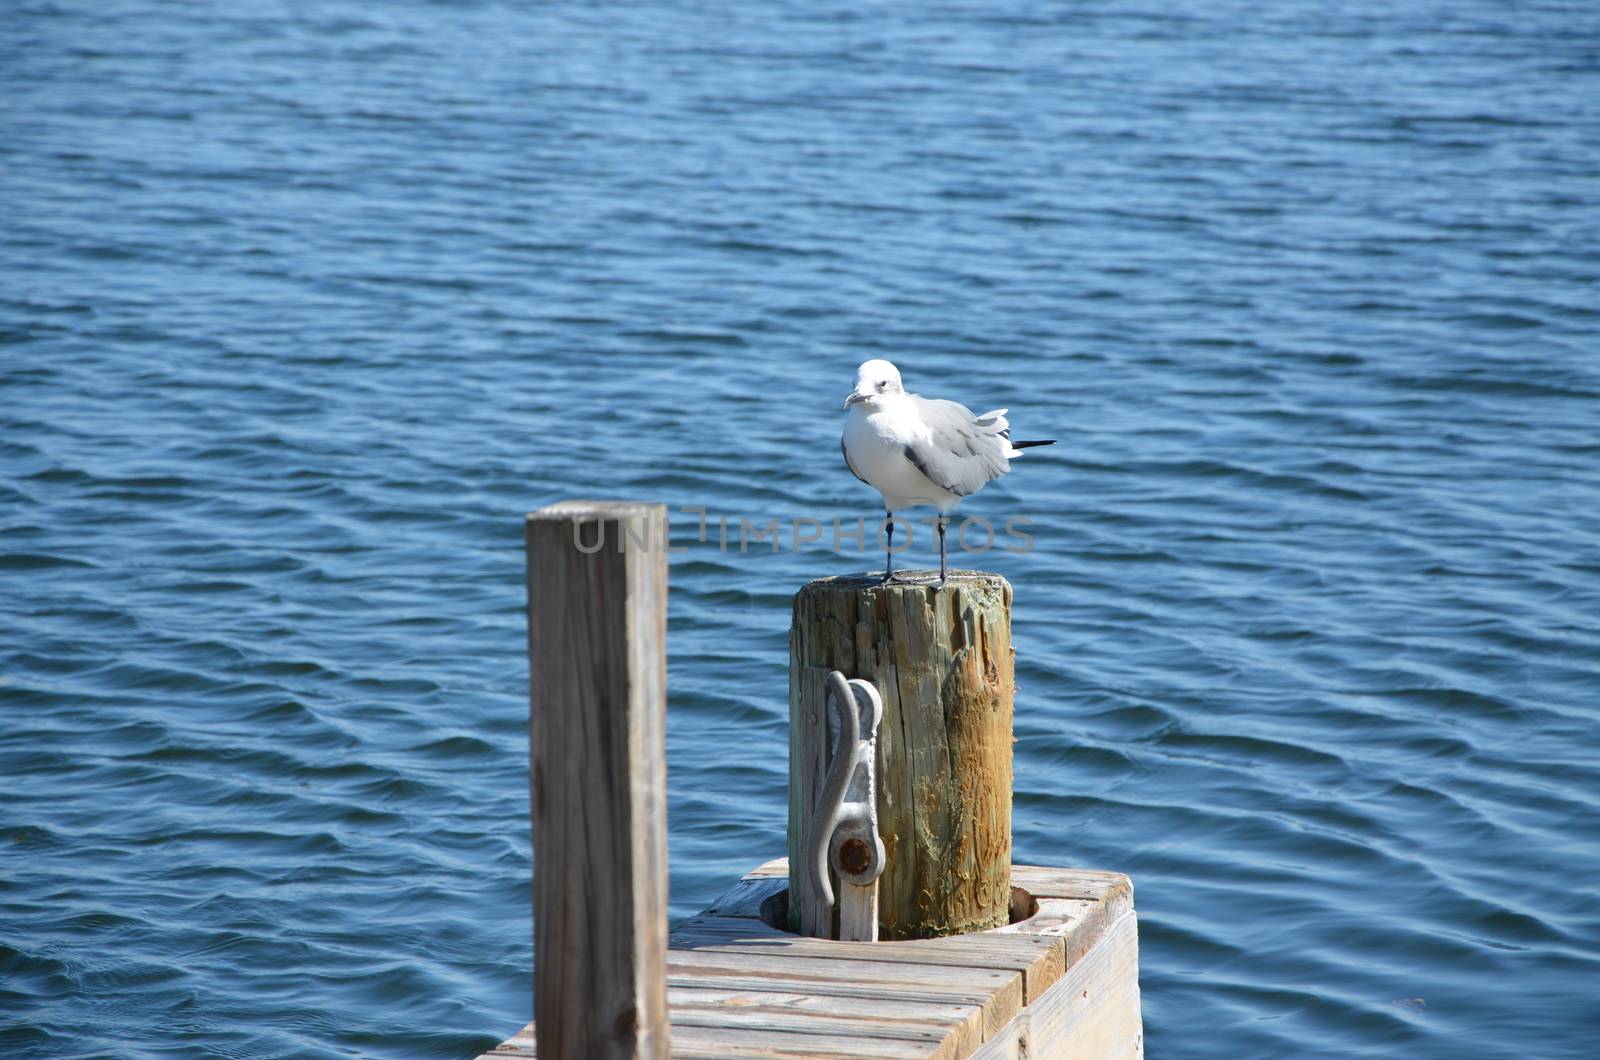 A seagull hanging out on the dock in the florida Keys